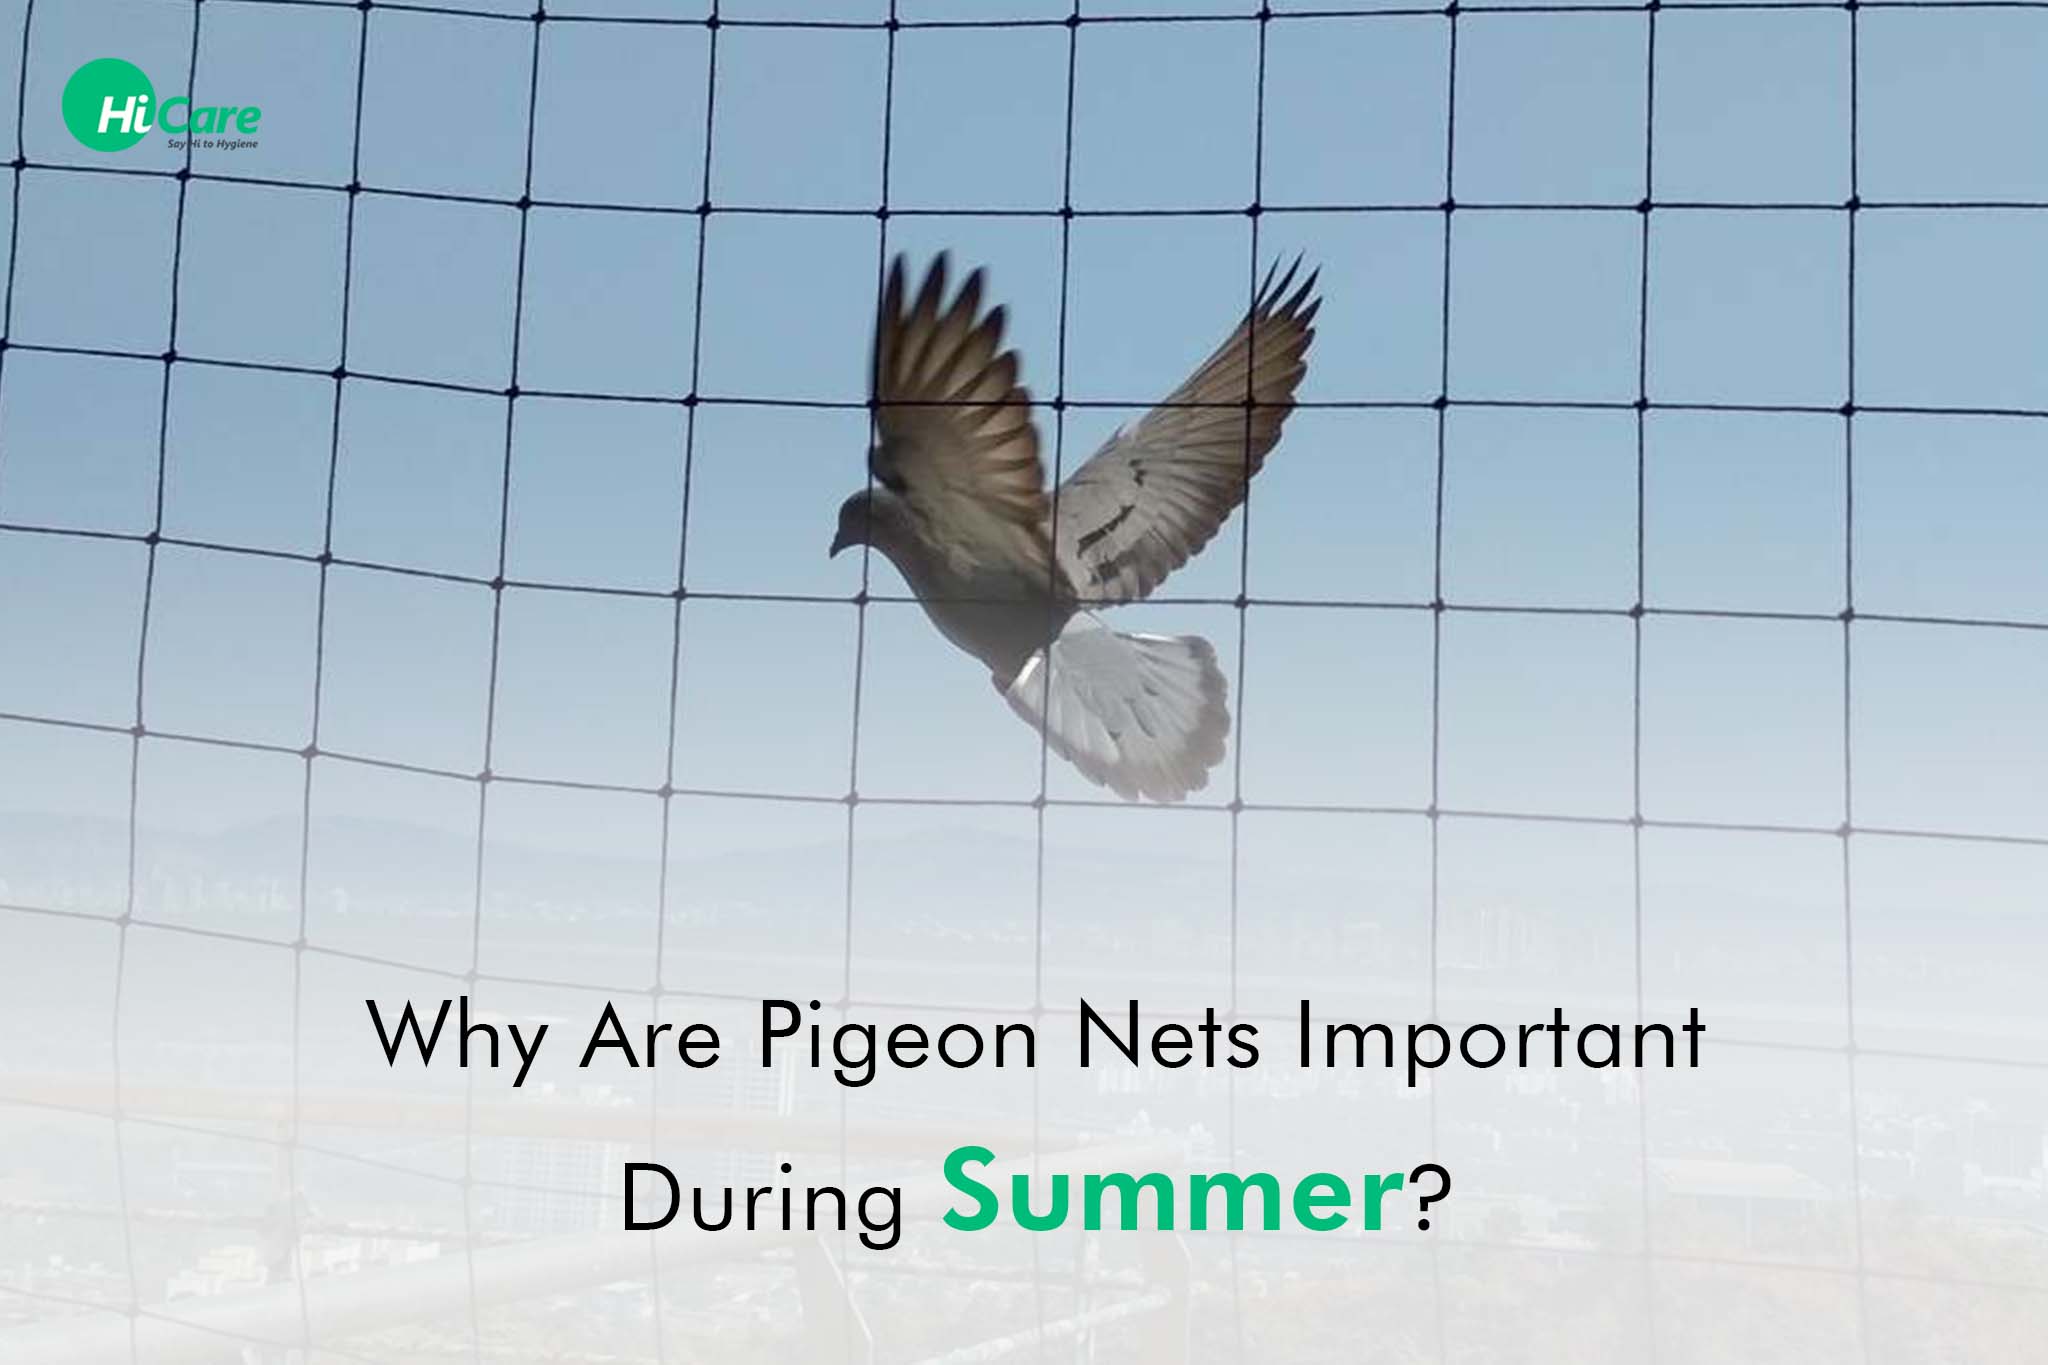 Why are Pigeon Nets Important during Summer?